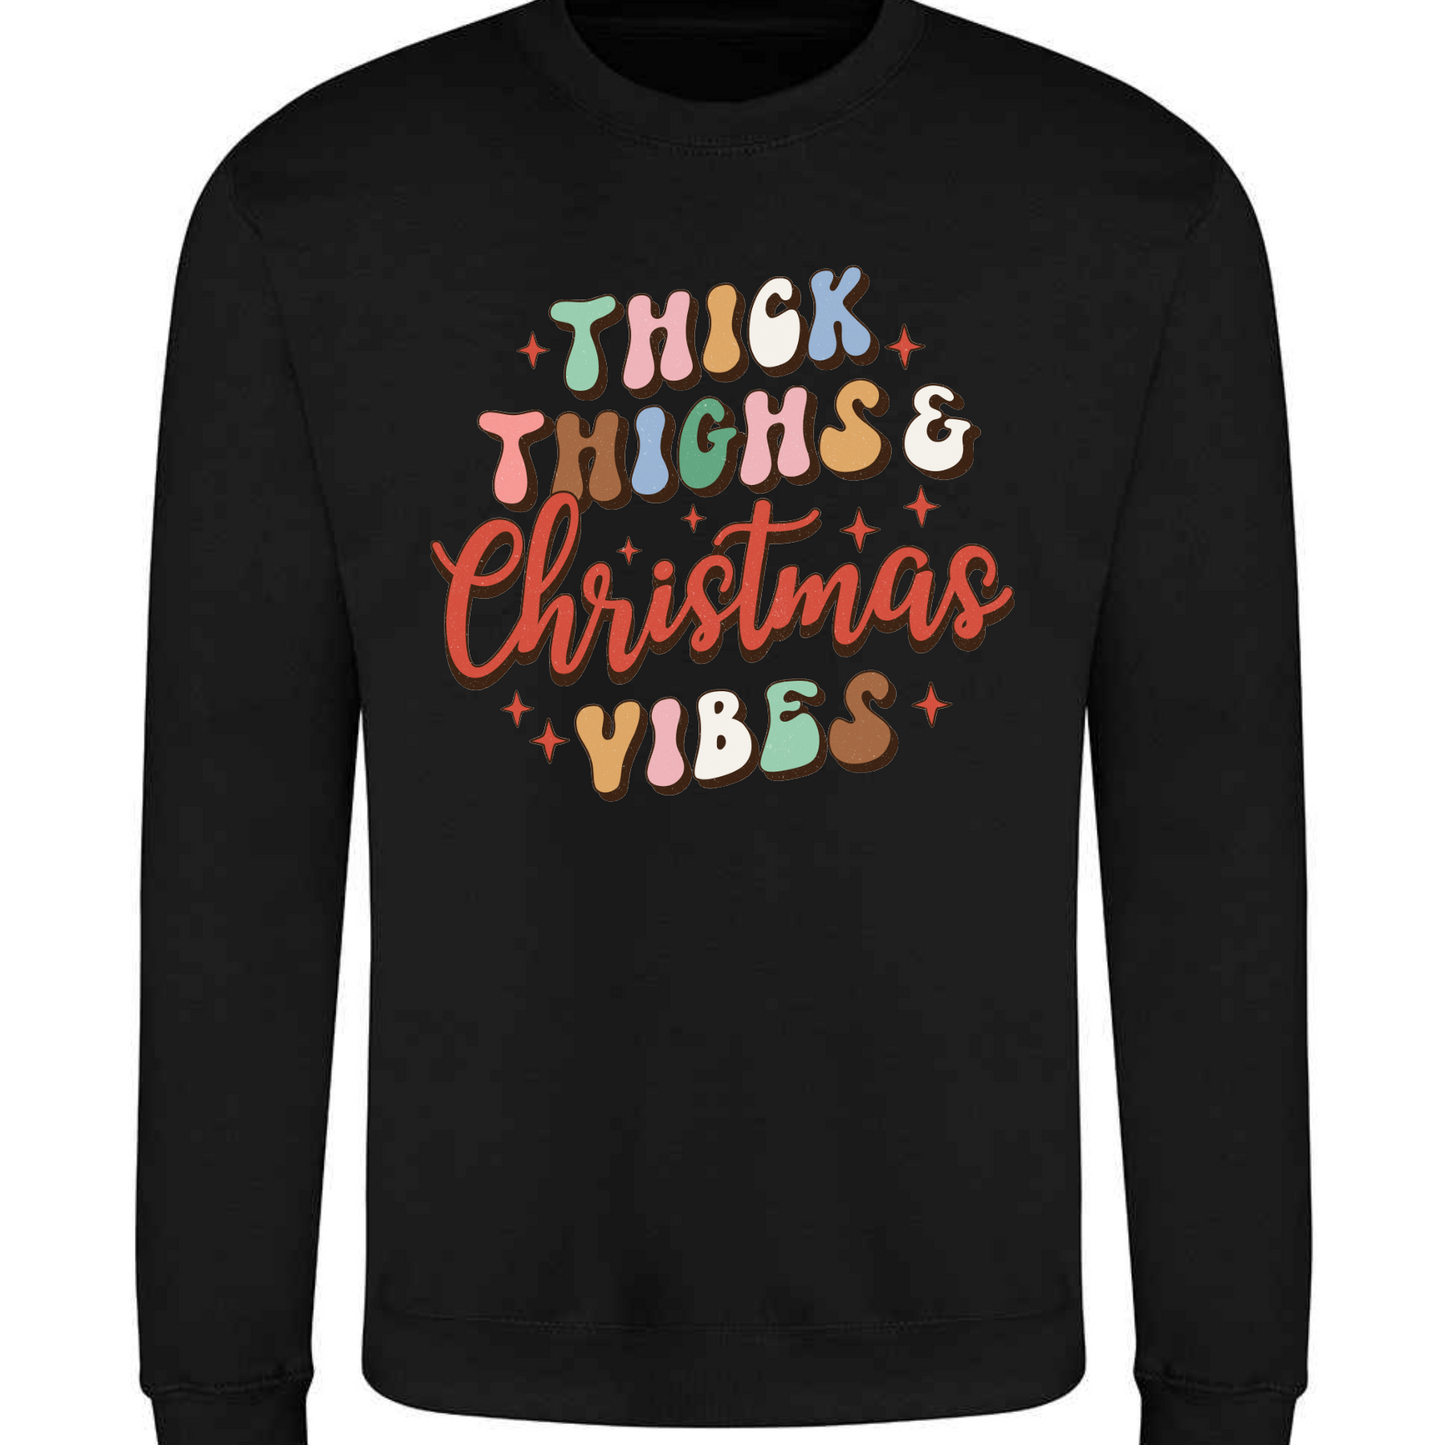 *Thick Thighs & Christmas Vibes* Retro DTF Transfer